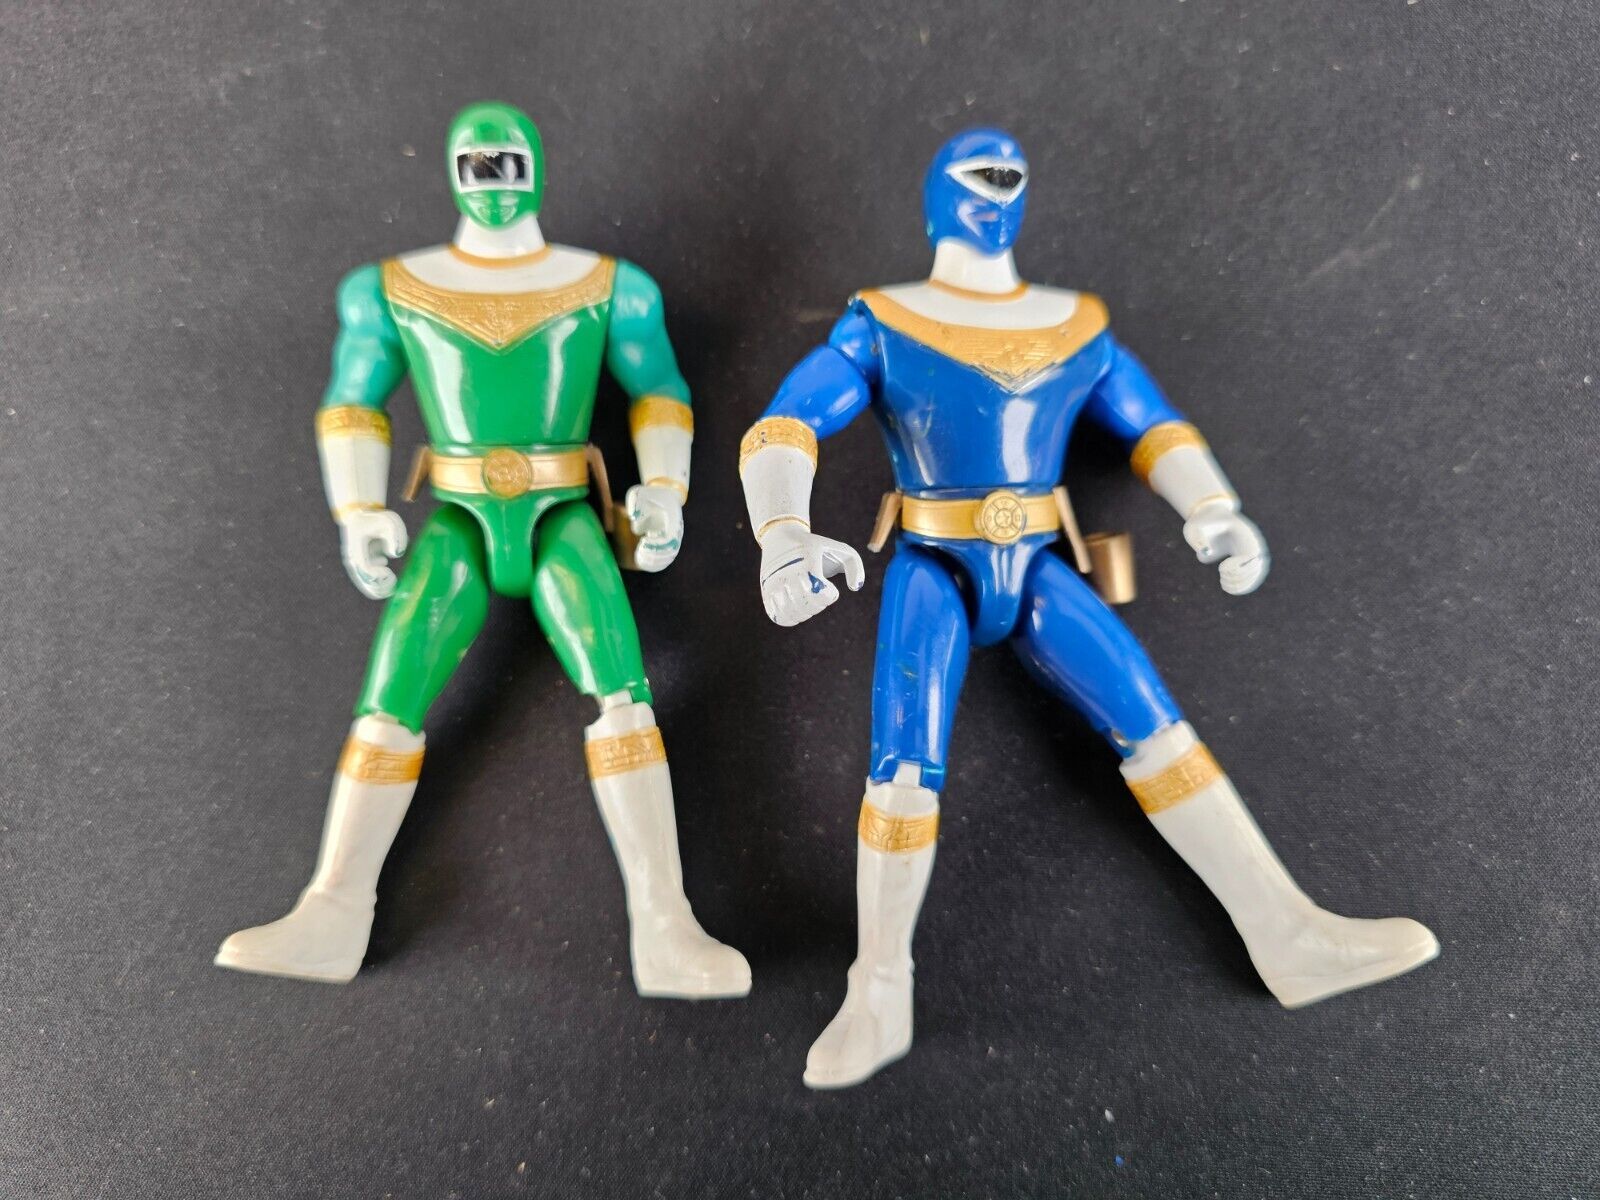 Lot Of 2 1996 Power Rangers Zeo Action Figure Bandai 5 Inch Blue Green - $7.87